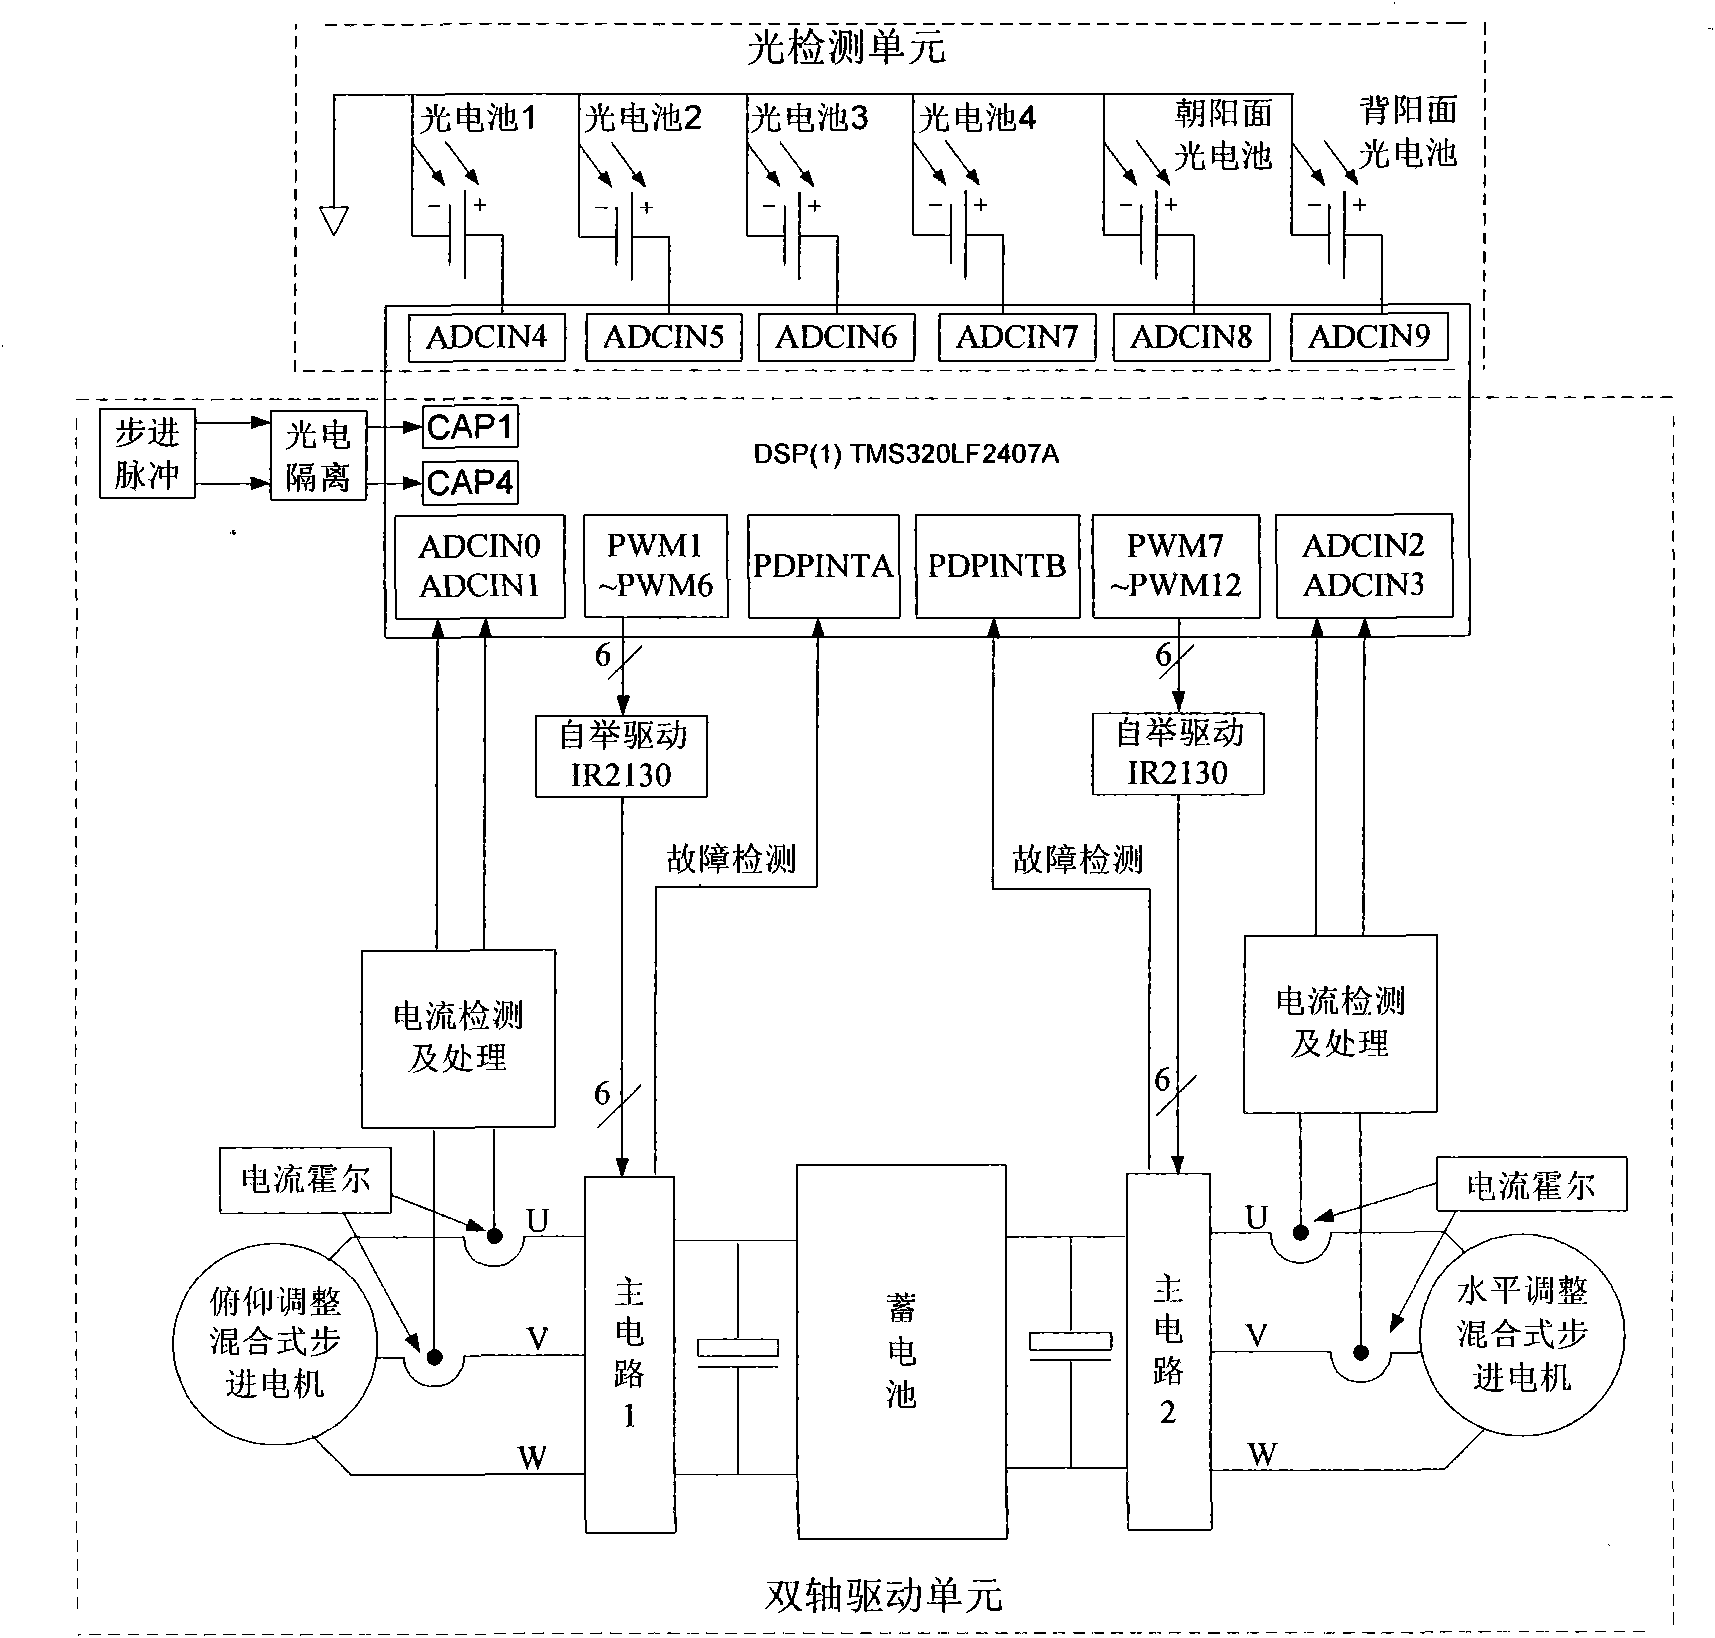 Connected grid wind-light complementation control inverting device